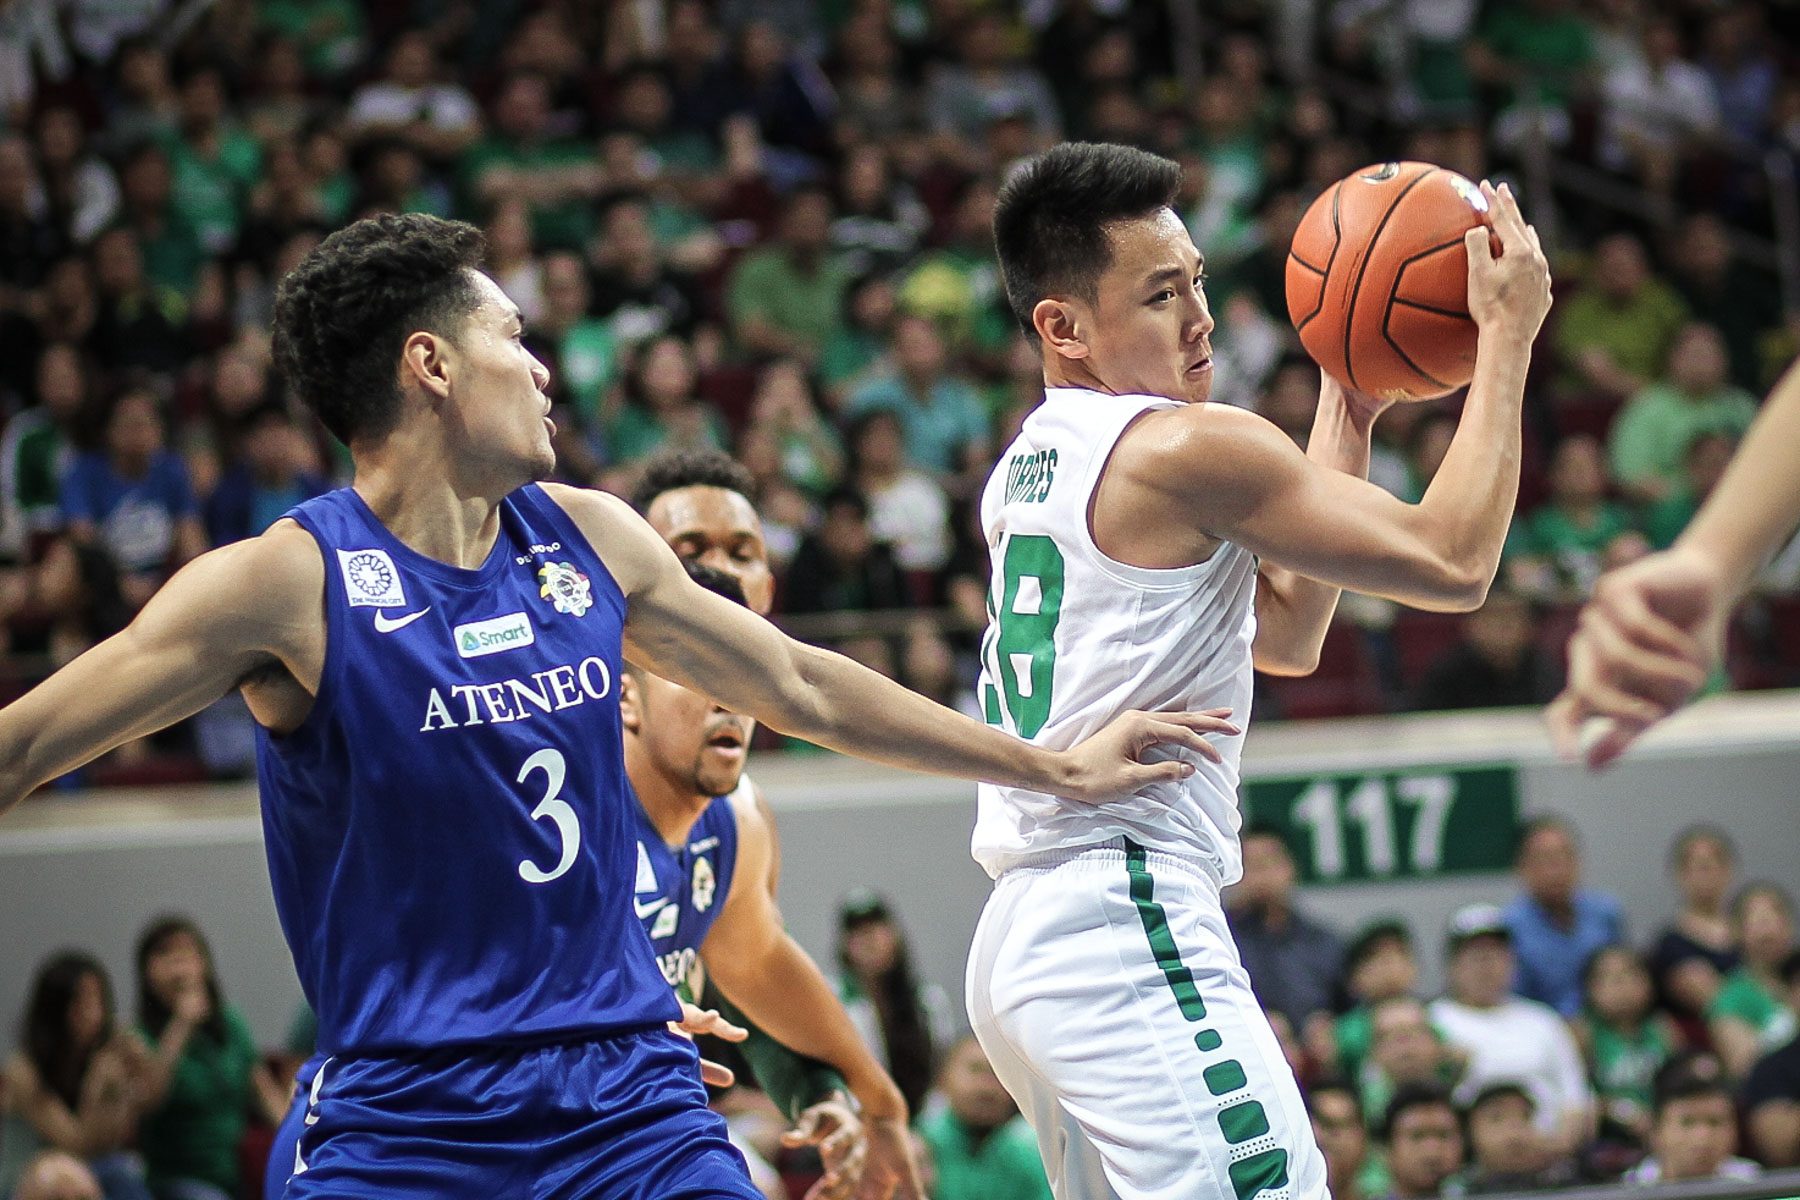 Thomas Torres doesn’t want La Salle thinking about 14-0